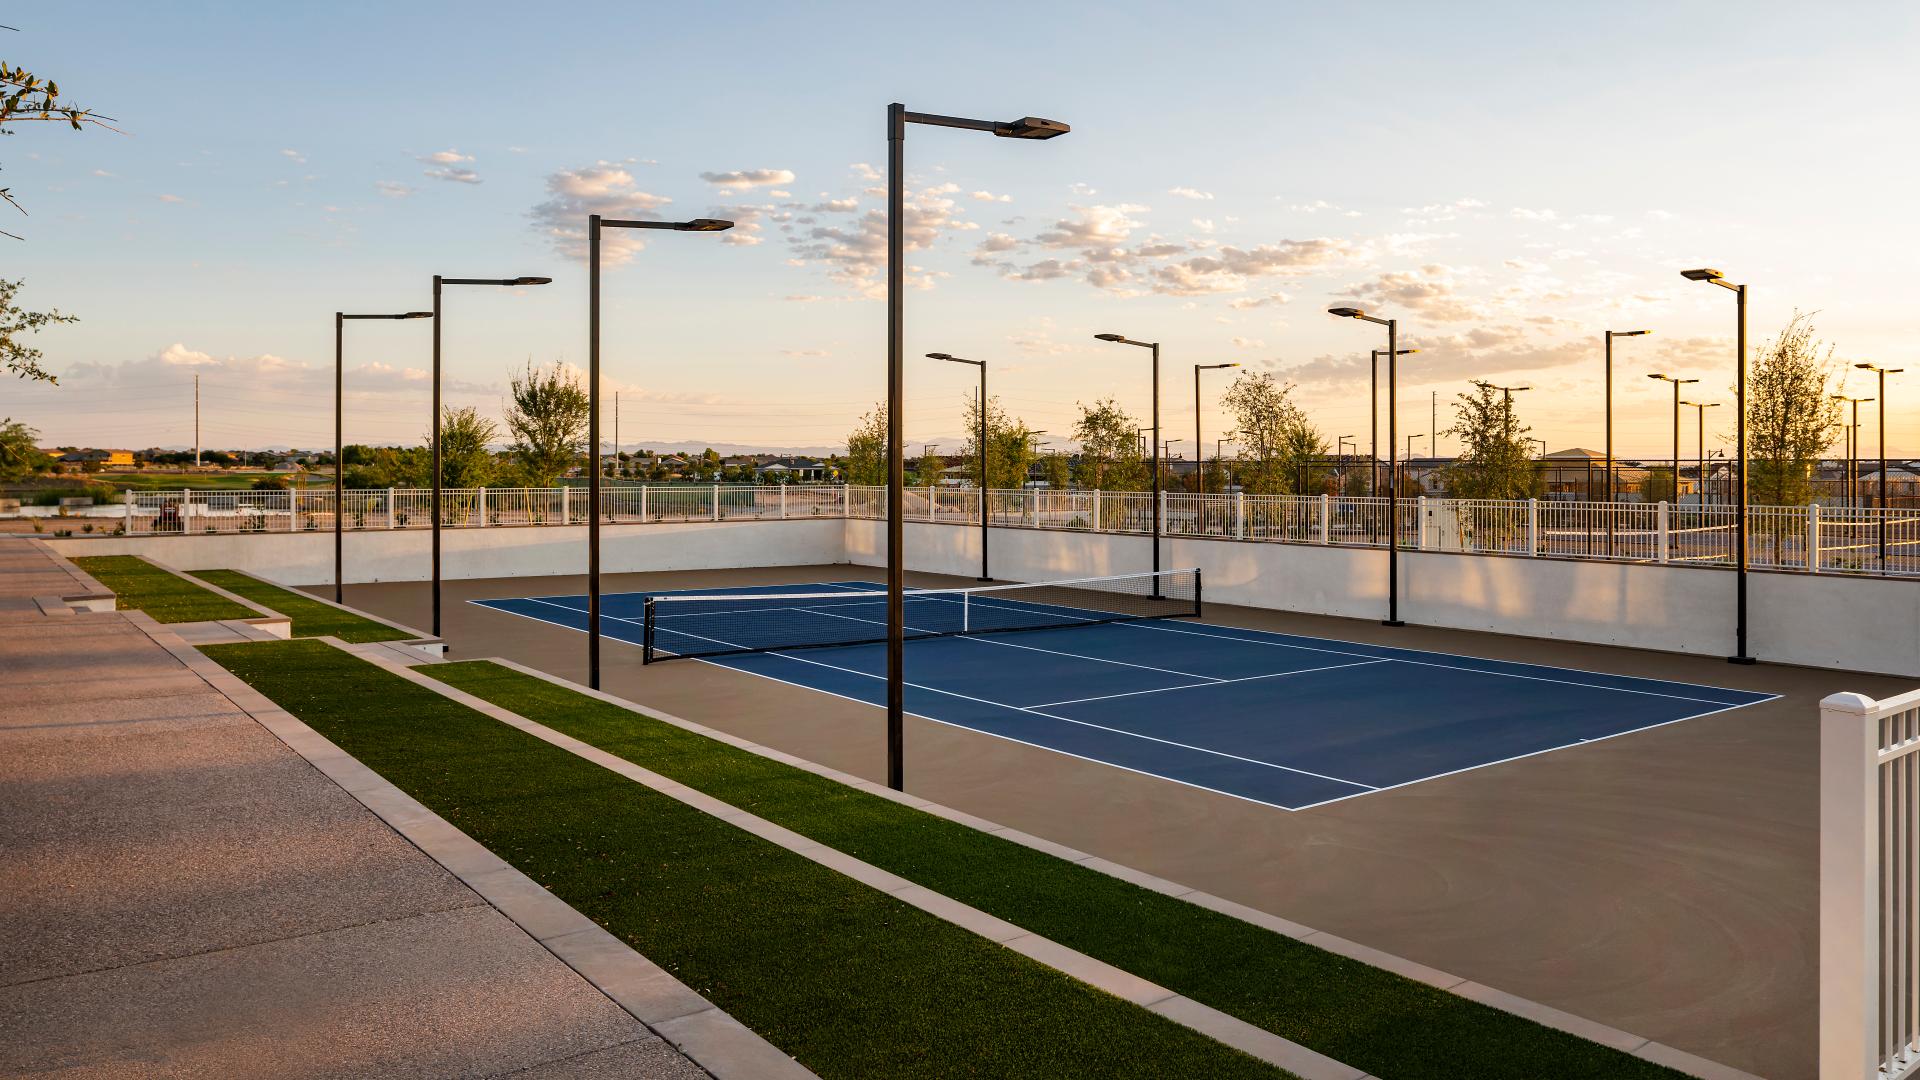 Outdoor tennis, pickleball, and bocce ball courts for year-round enjoyment